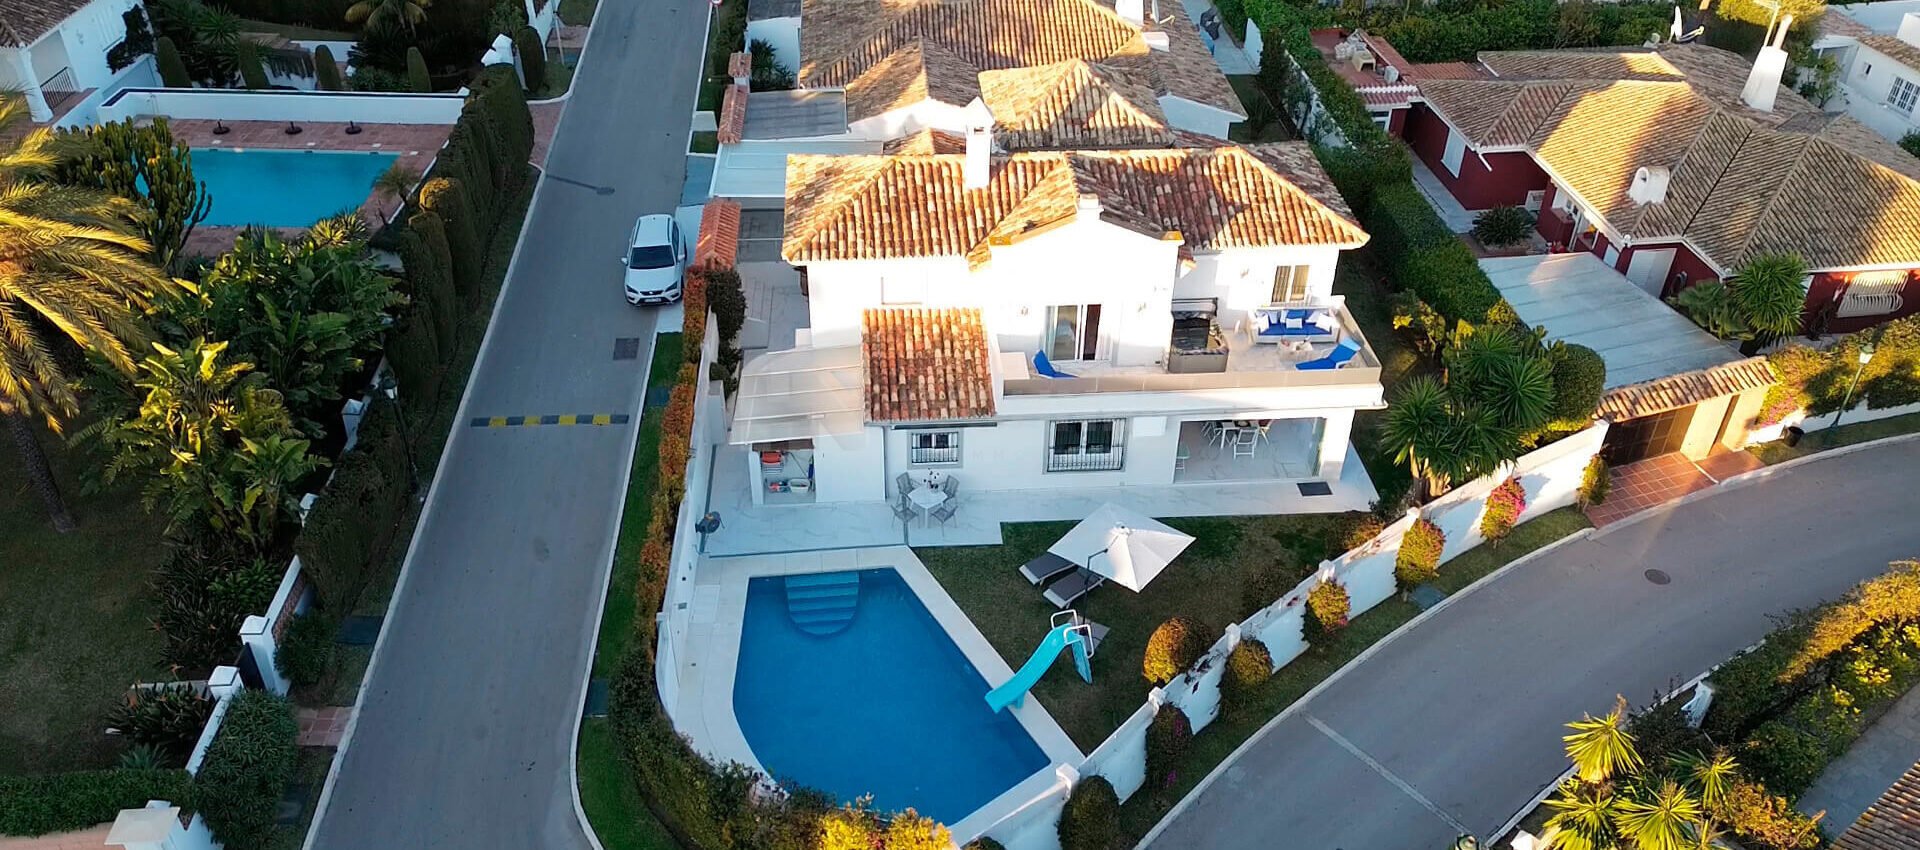 Villa in one of the most privileged areas of Marbella next to the beach